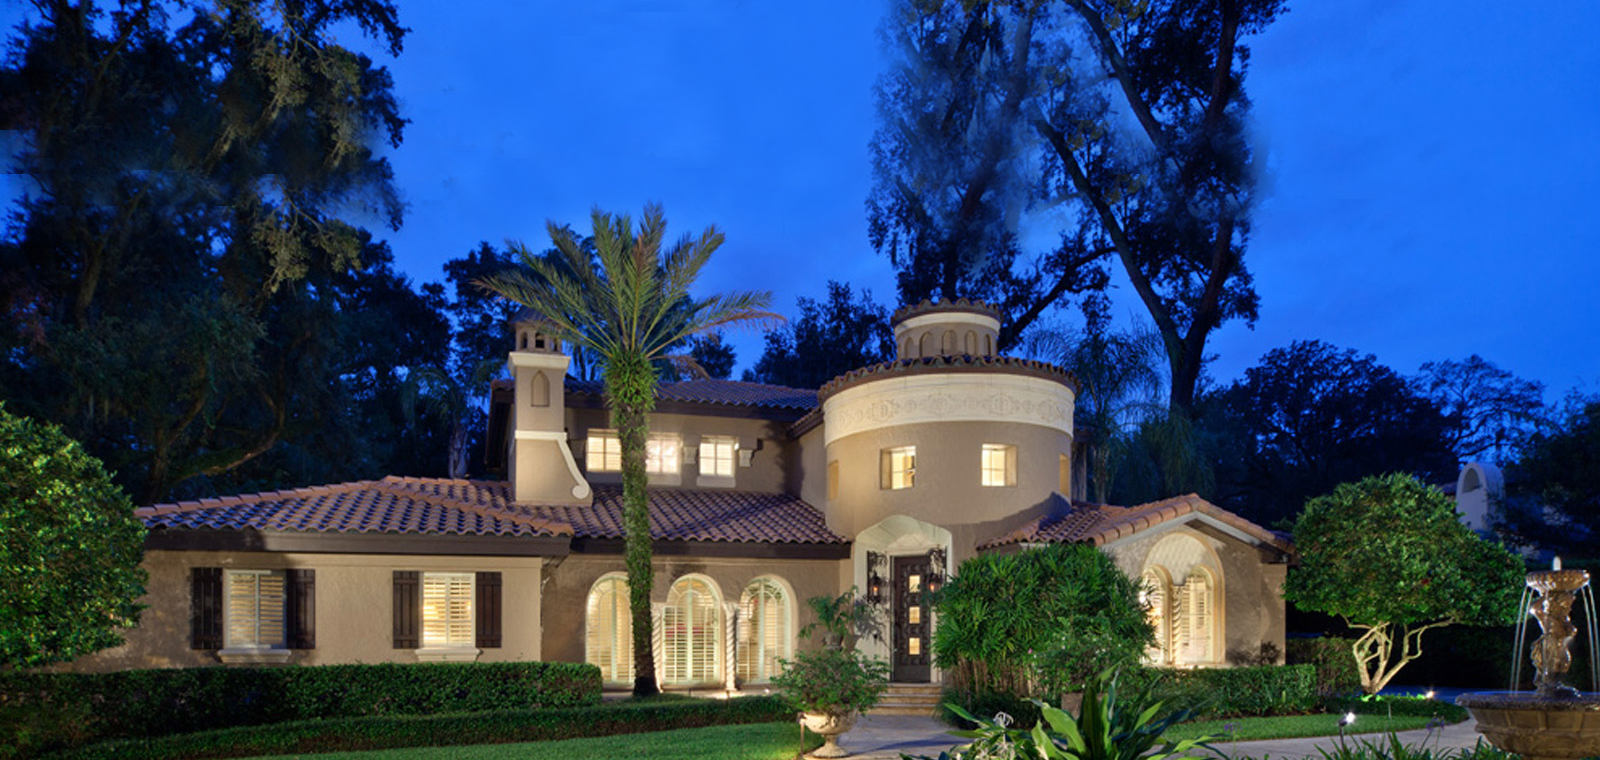 Luxury homes in Central Florida - Chris Quarles Properties